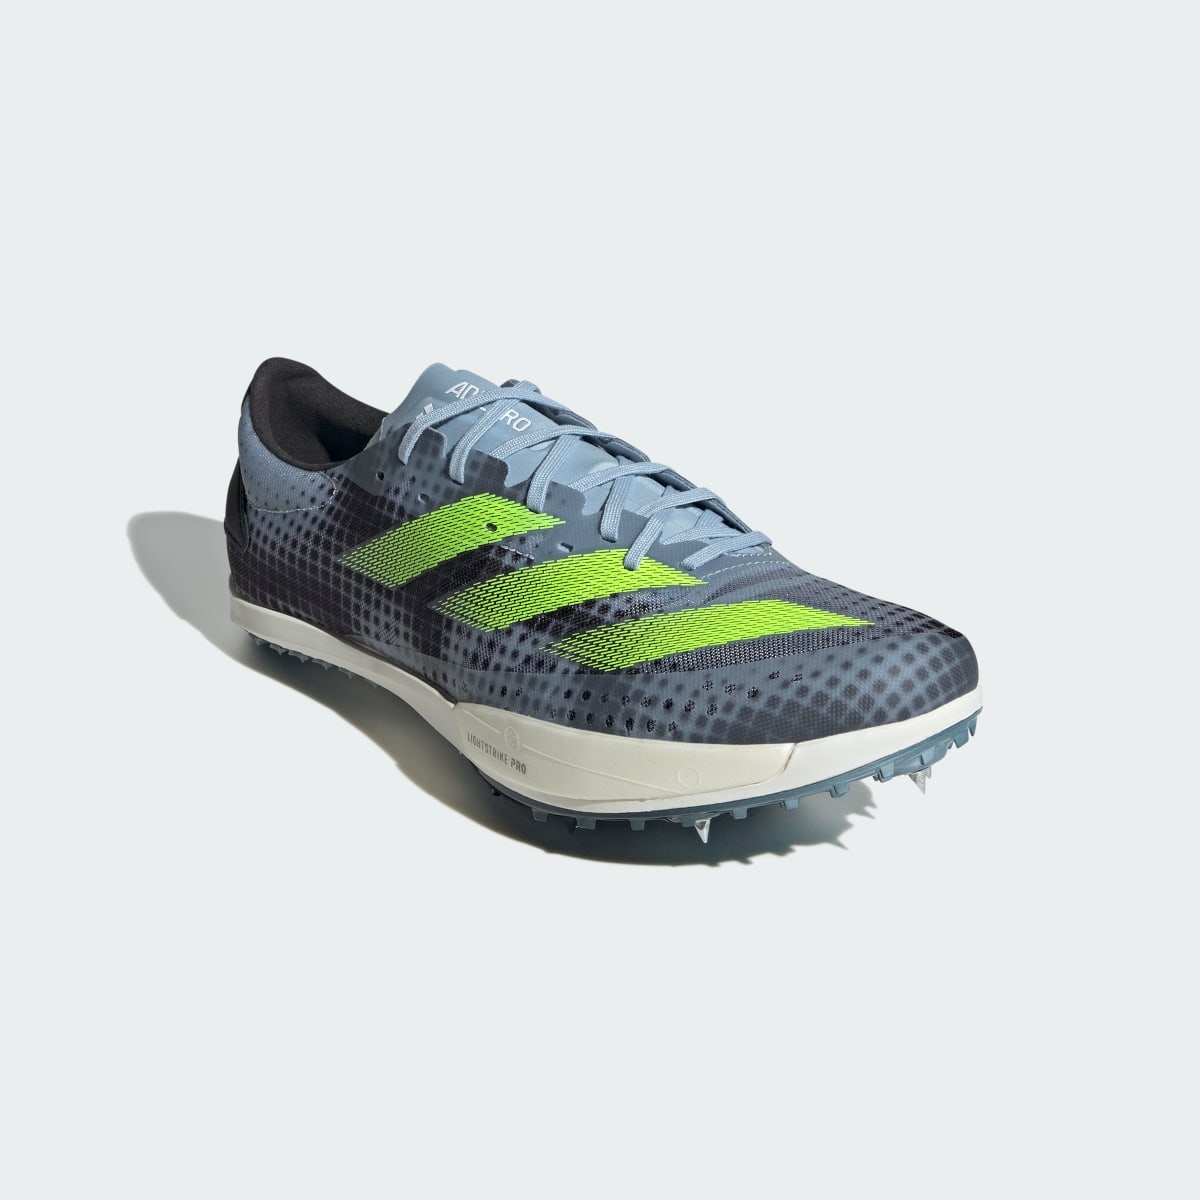 Adidas Adizero Ambition Track and Field Lightstrike Shoes. 5